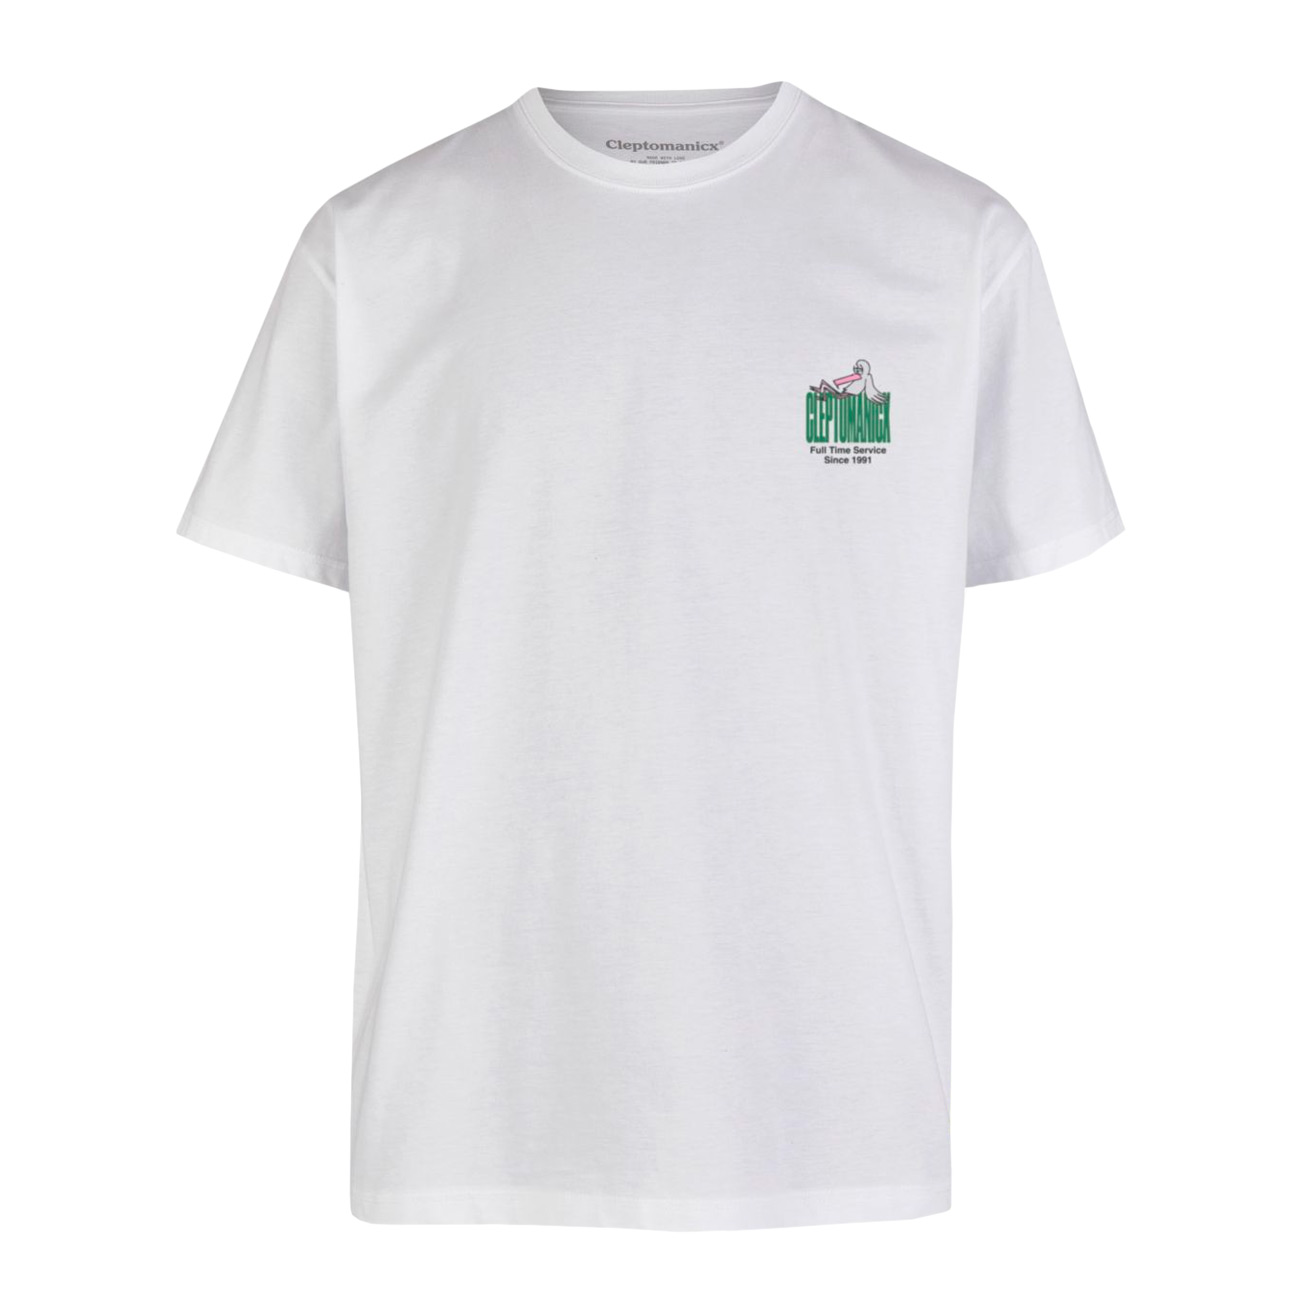 Cleptomanicx T-Shirt Full Time Service (white)